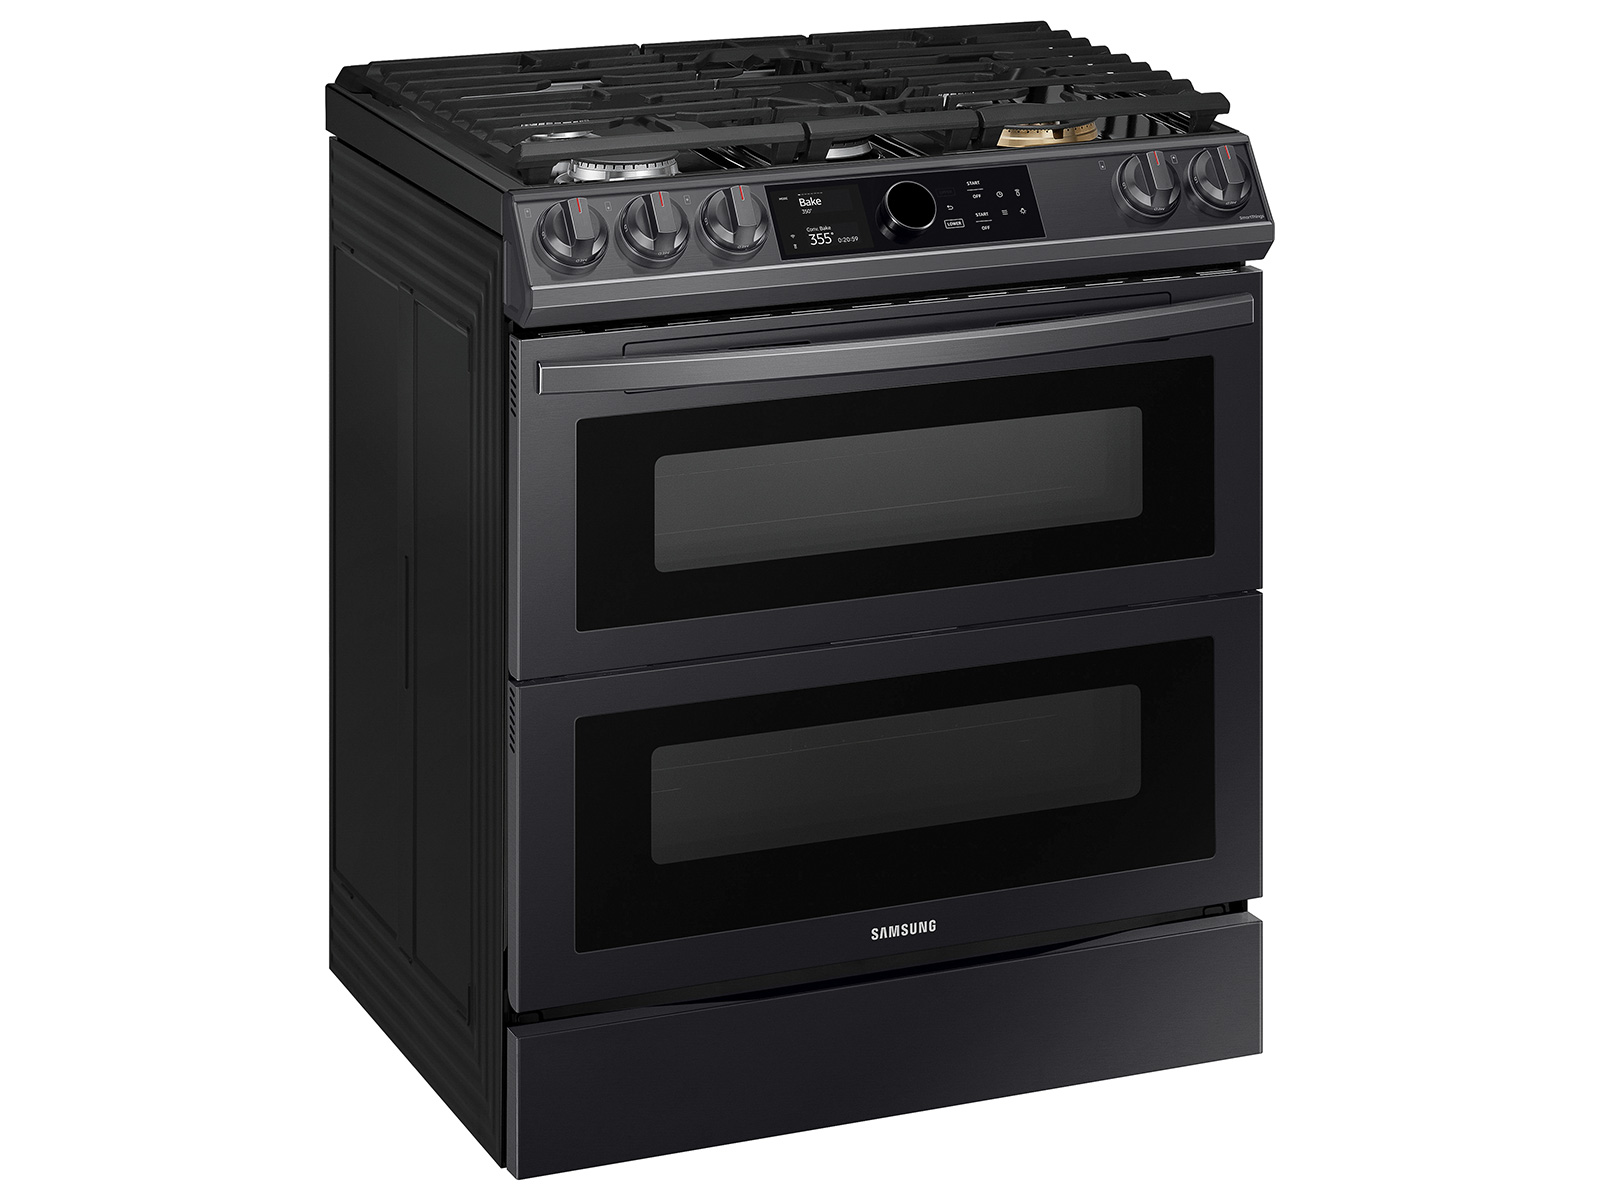 Samsung NX60T8751SS 30 Inch Slide-in Gas Smart Range with 5 Sealed Burners,  6.0 Cu. Ft. Flex Duo™ Oven, Self Clean, Storage Drawer, Smart Dial, Air Fry,  Wi-Fi, Voice Activation, Sabbath Mode, ETL